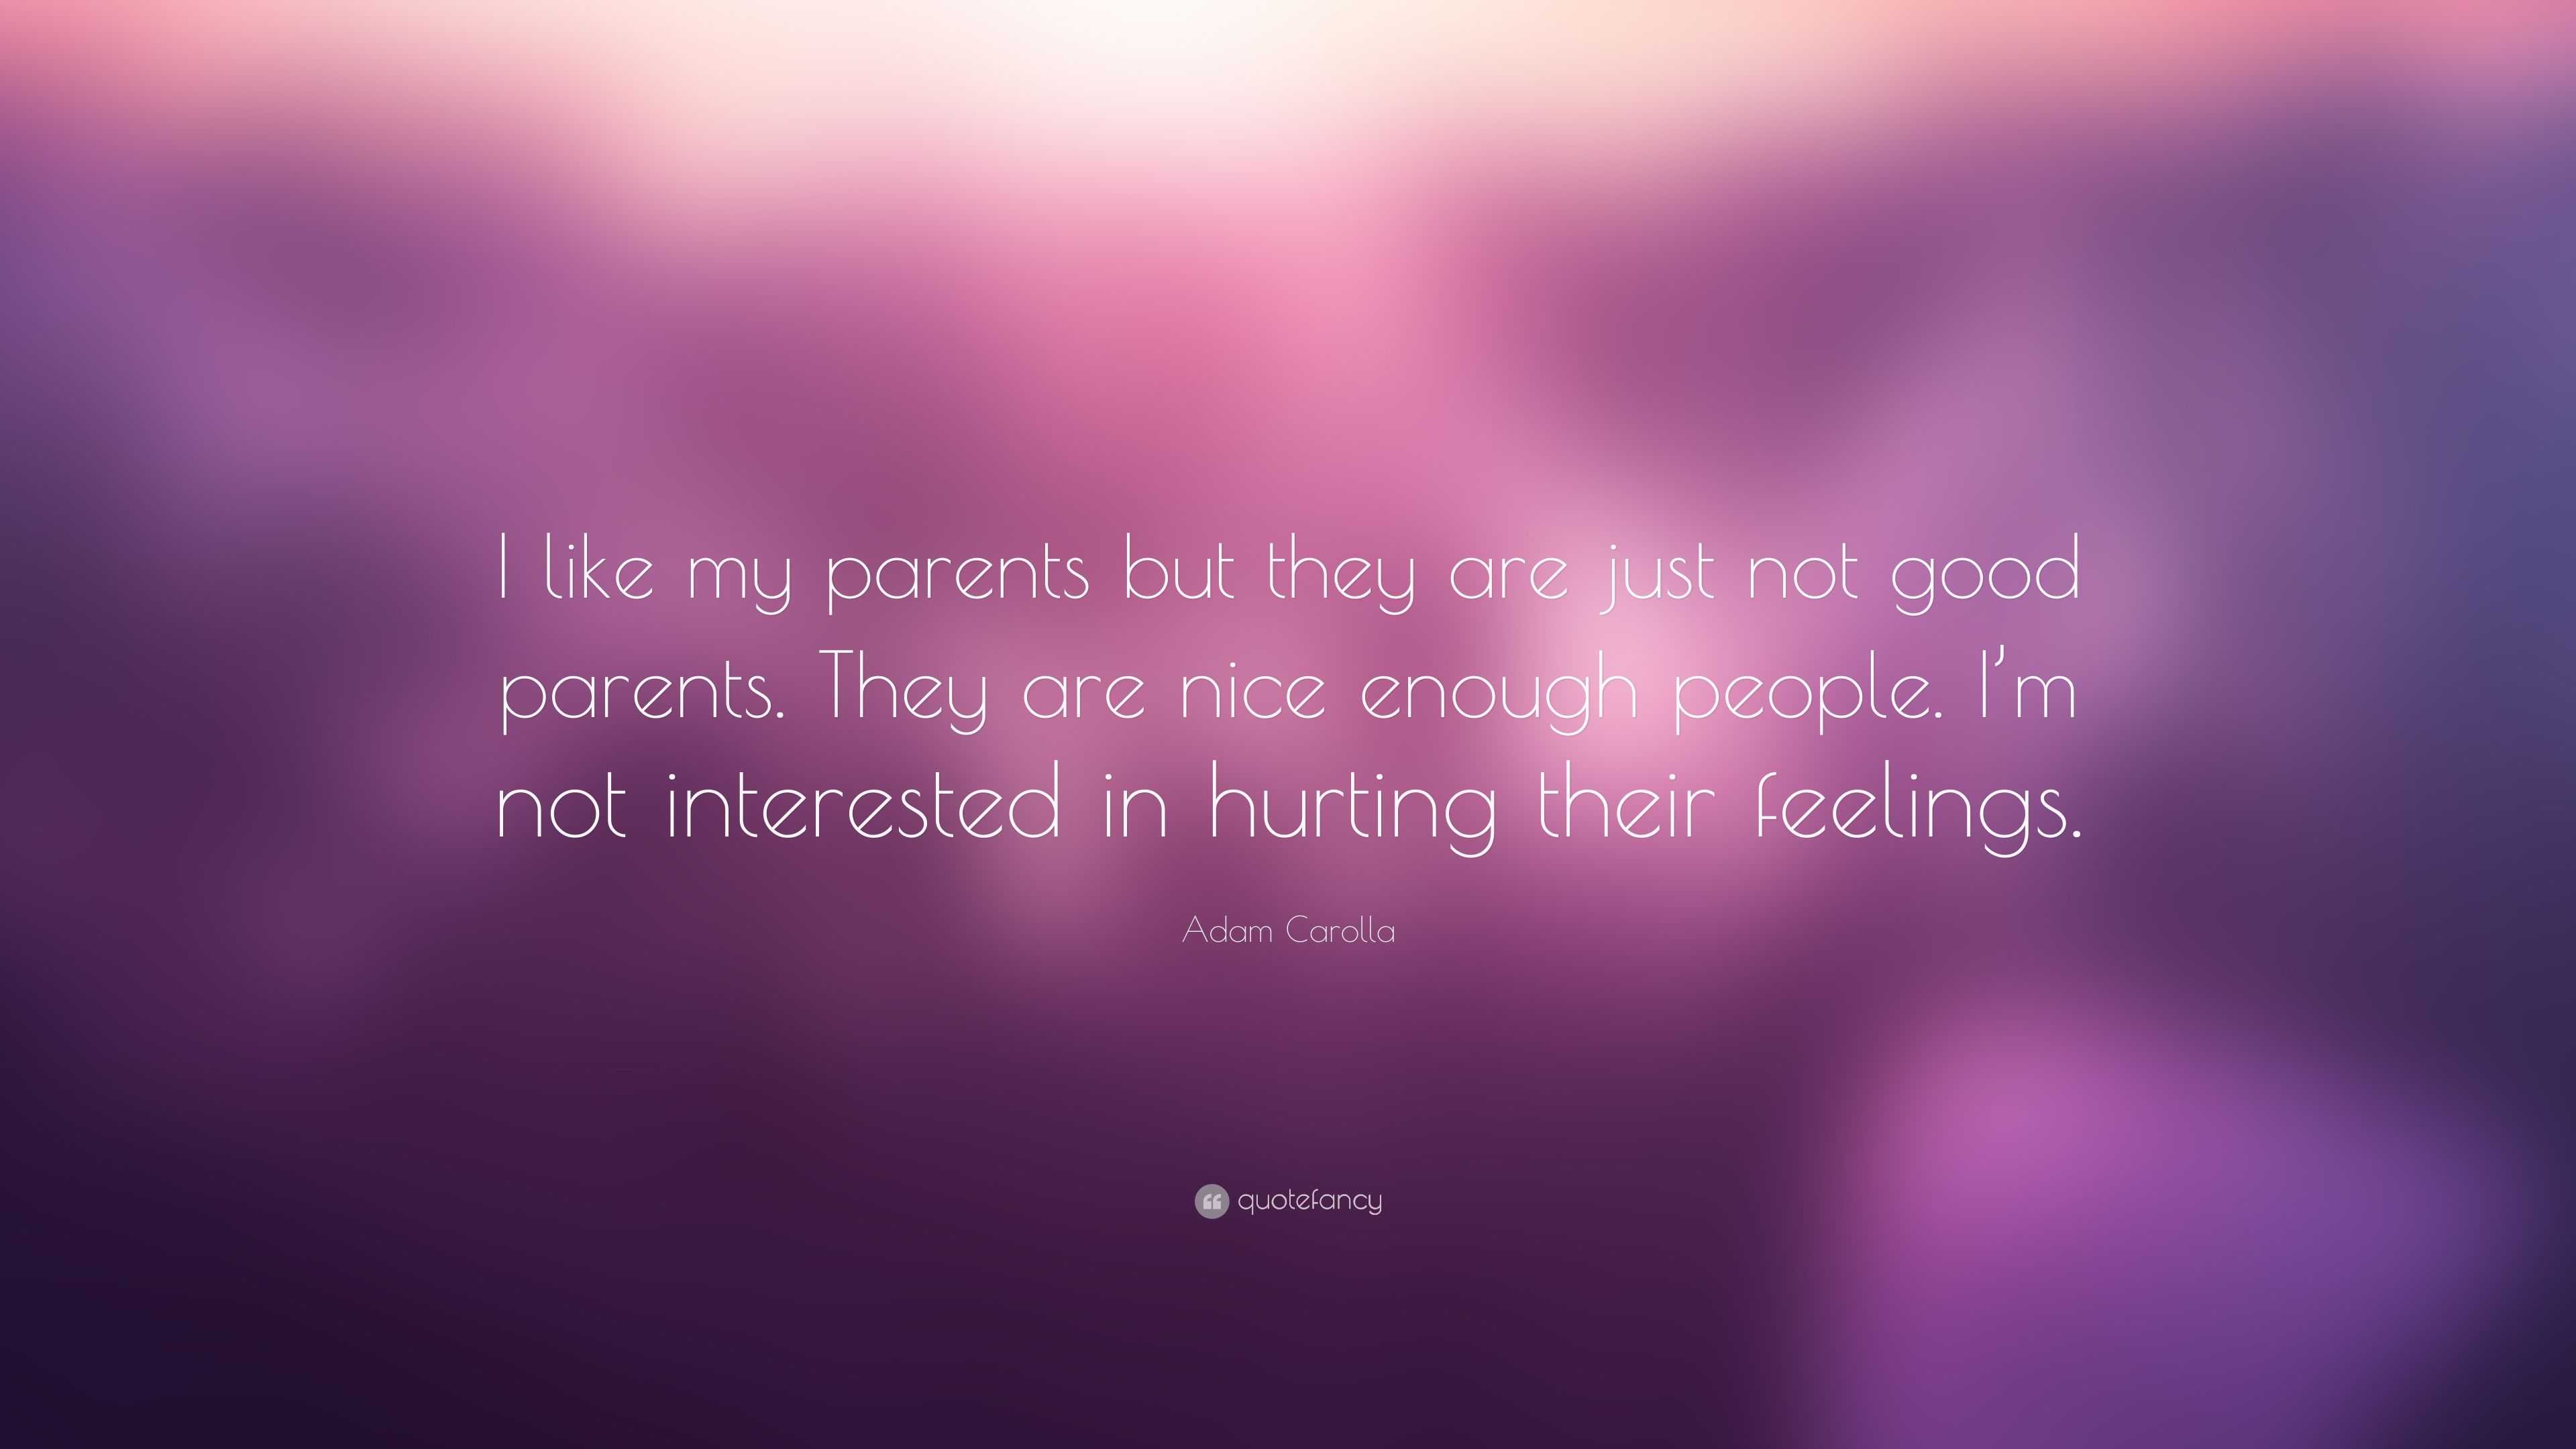 Adam Carolla Quote: “I like my parents but they are just not good ...